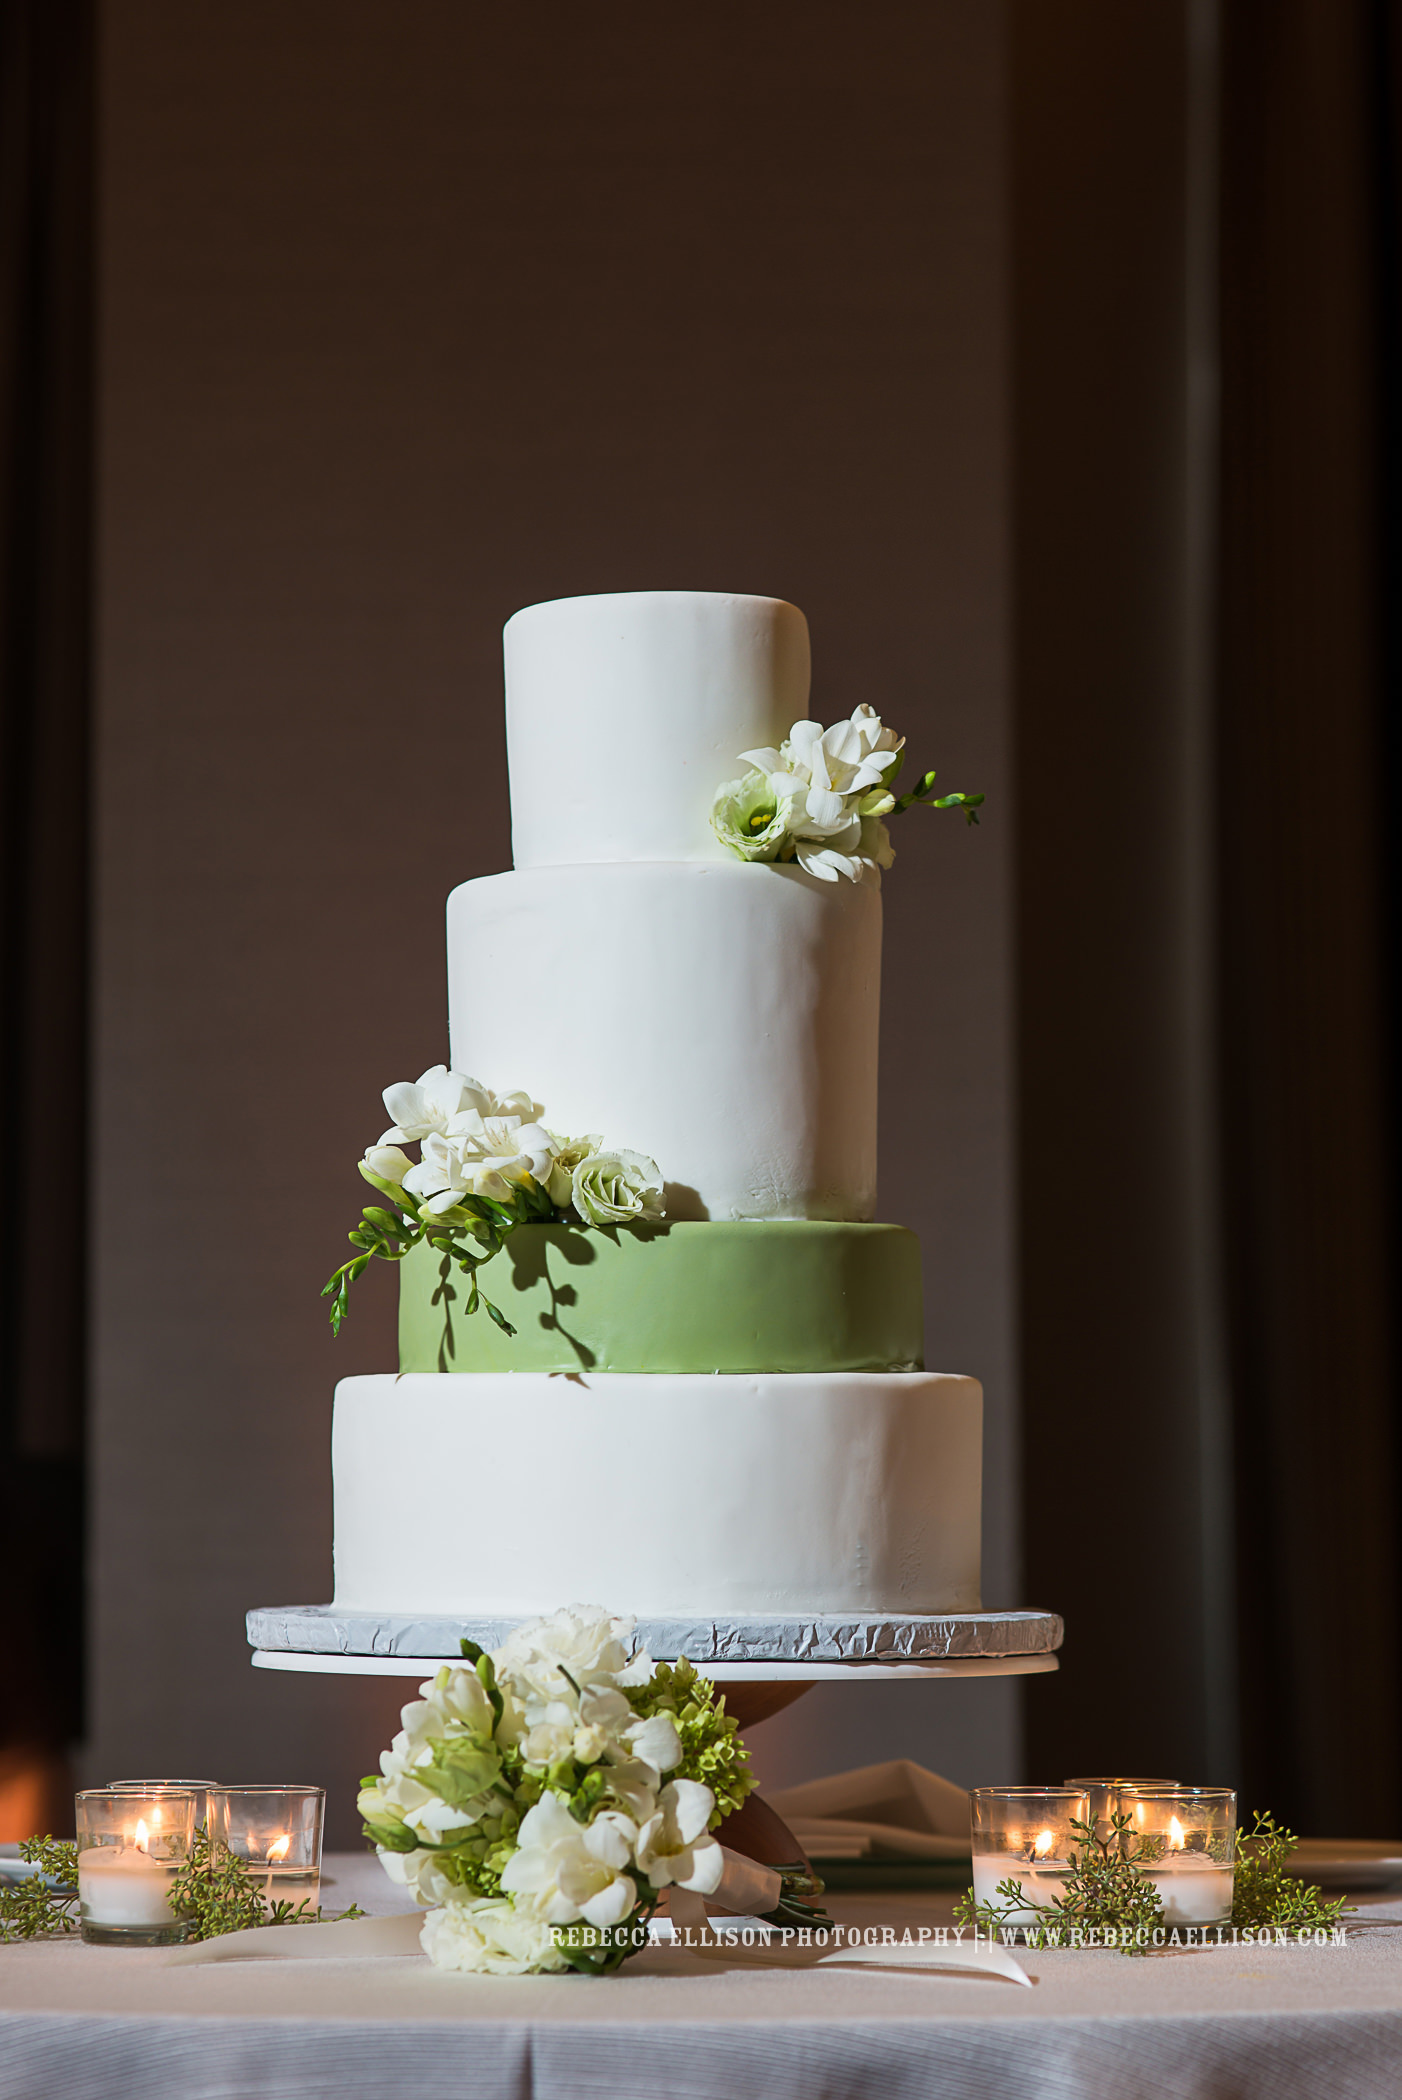 Cake Decorated with White Freesia